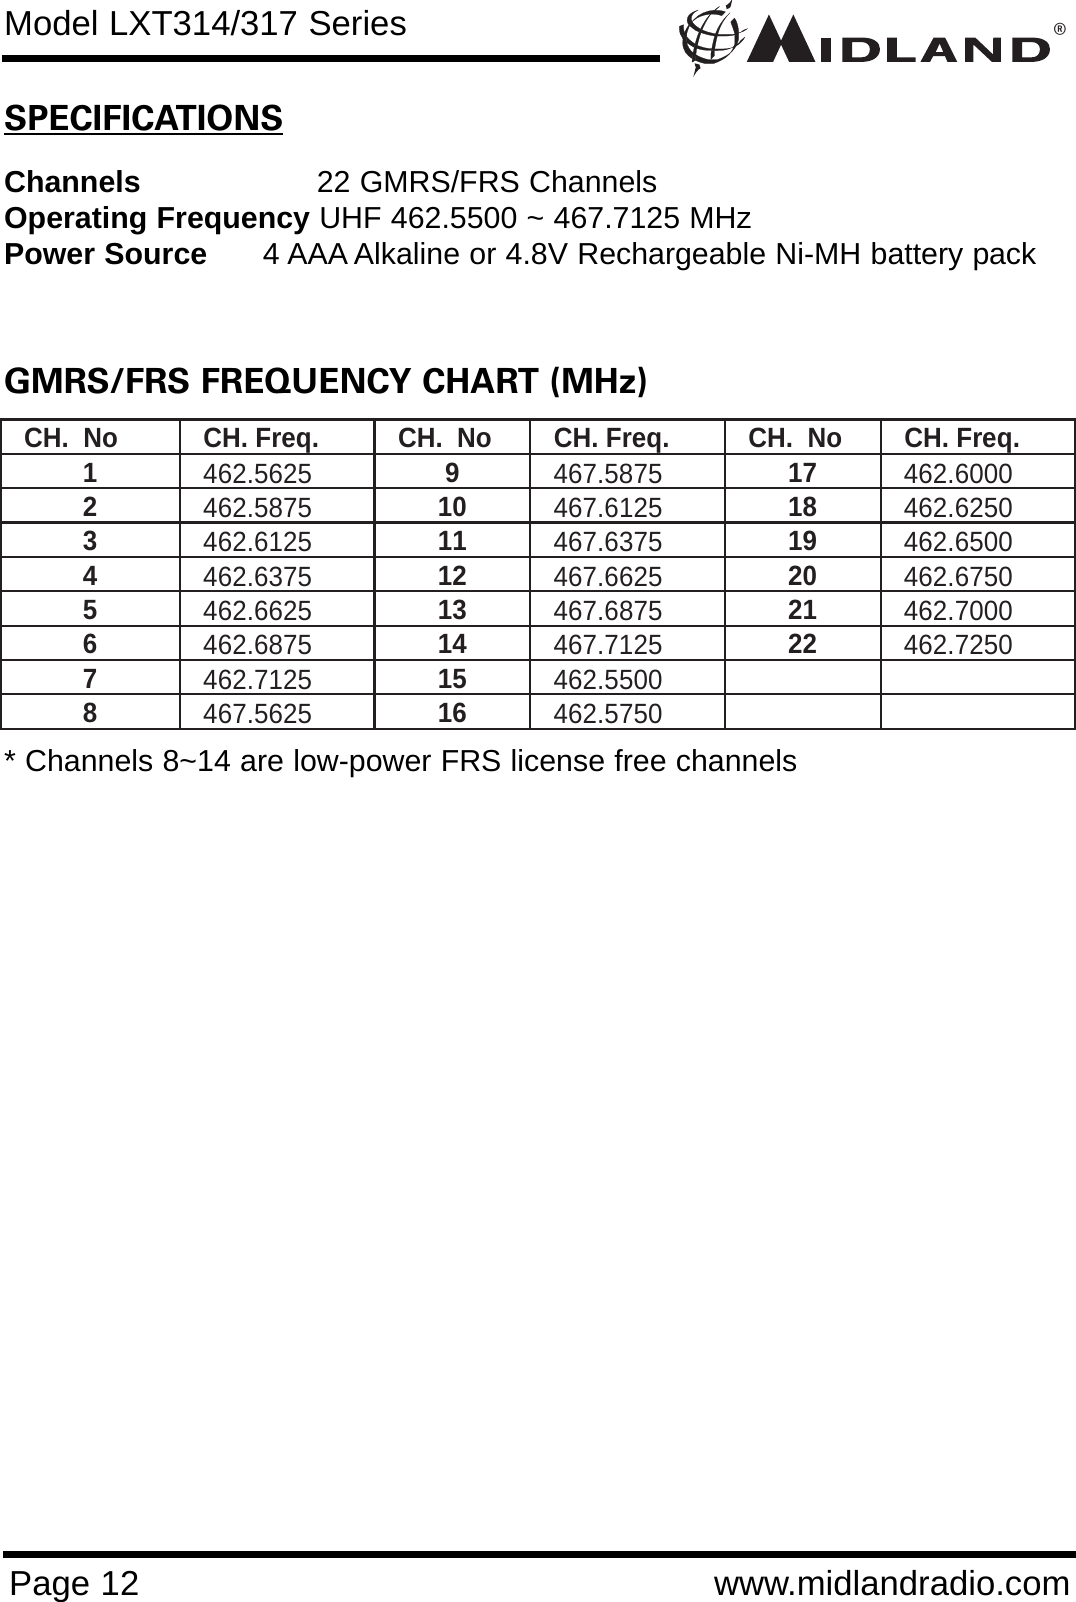 ®Page 12 www.midlandradio.comSPECIFICATIONSChannels 22 GMRS/FRS Channels Operating Frequency UHF 462.5500 ~ 467.7125 MHzPower Source 4 AAA Alkaline or 4.8V Rechargeable Ni-MH battery packGMRS/FRS FREQUENCY CHART (MHz)CH.  No  CH. Freq.  CH.  No  CH. Freq.  CH.  No  CH. Freq. 1  462.5625 9  467.5875 17  462.6000 2  462.5875 10  467.6125 18  462.6250 3  462.6125 11  467.6375 19  462.6500 4  462.6375 12  467.6625 20  462.6750 5  462.6625 13  467.6875 21  462.7000 6  462.6875 14  467.7125 22  462.7250 7  462.7125 15  462.5500   8  467.5625 16  462.5750   * Channels 8~14 are low-power FRS license free channelsModel LXT314/317 Series